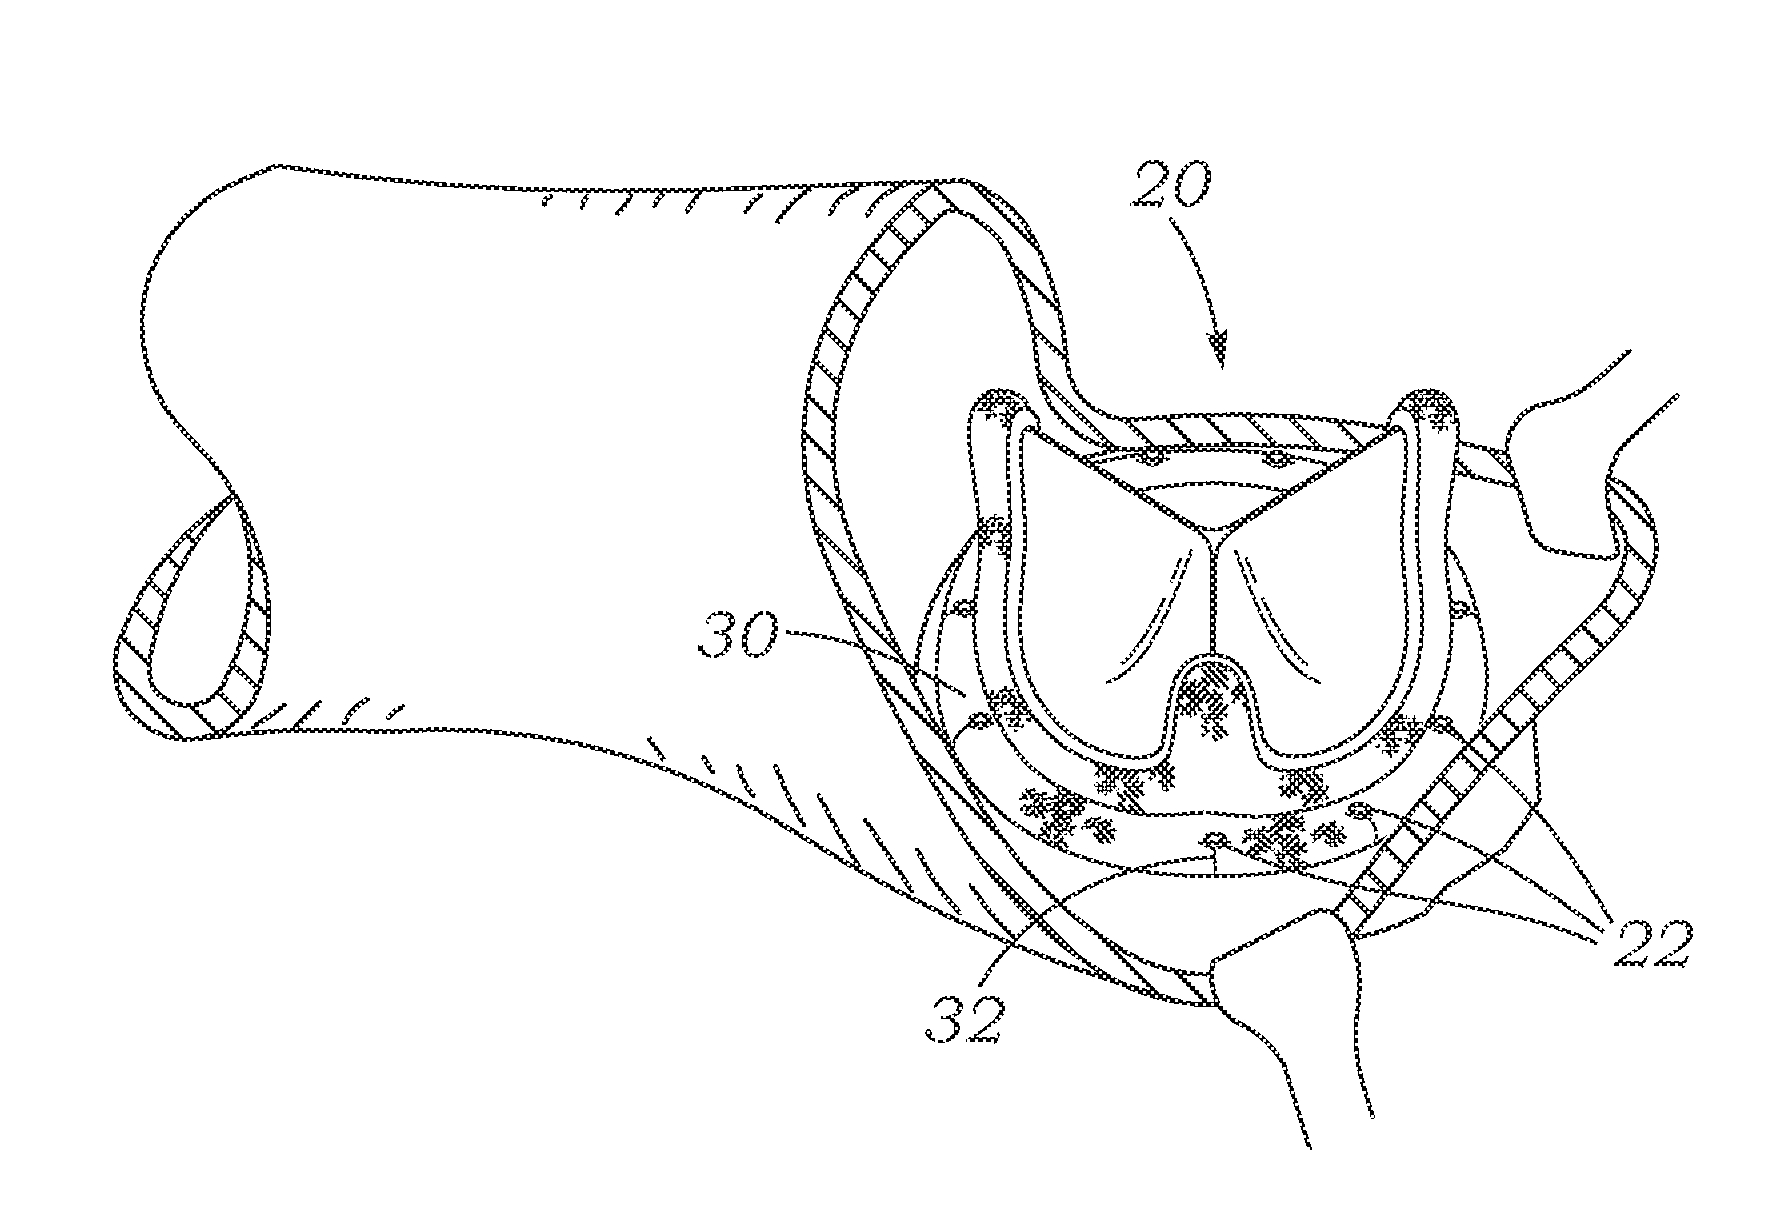 Cardiac implant with integrated suture fasteners